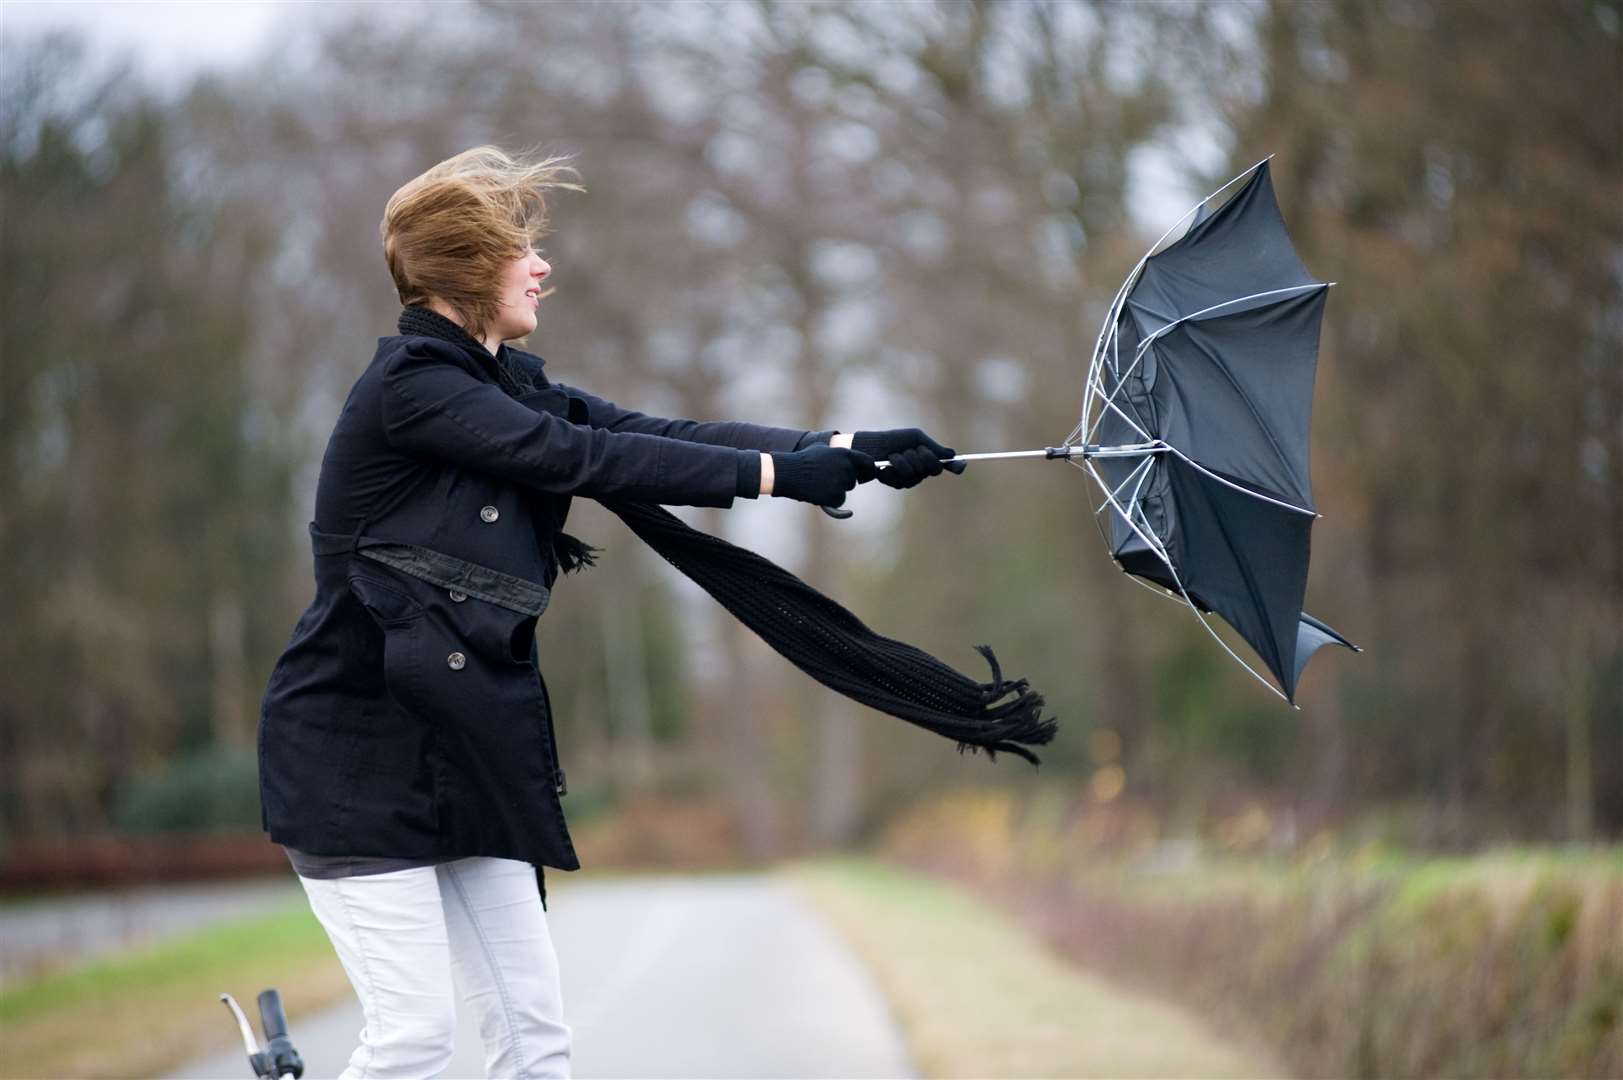 Strong winds are set to hit the county